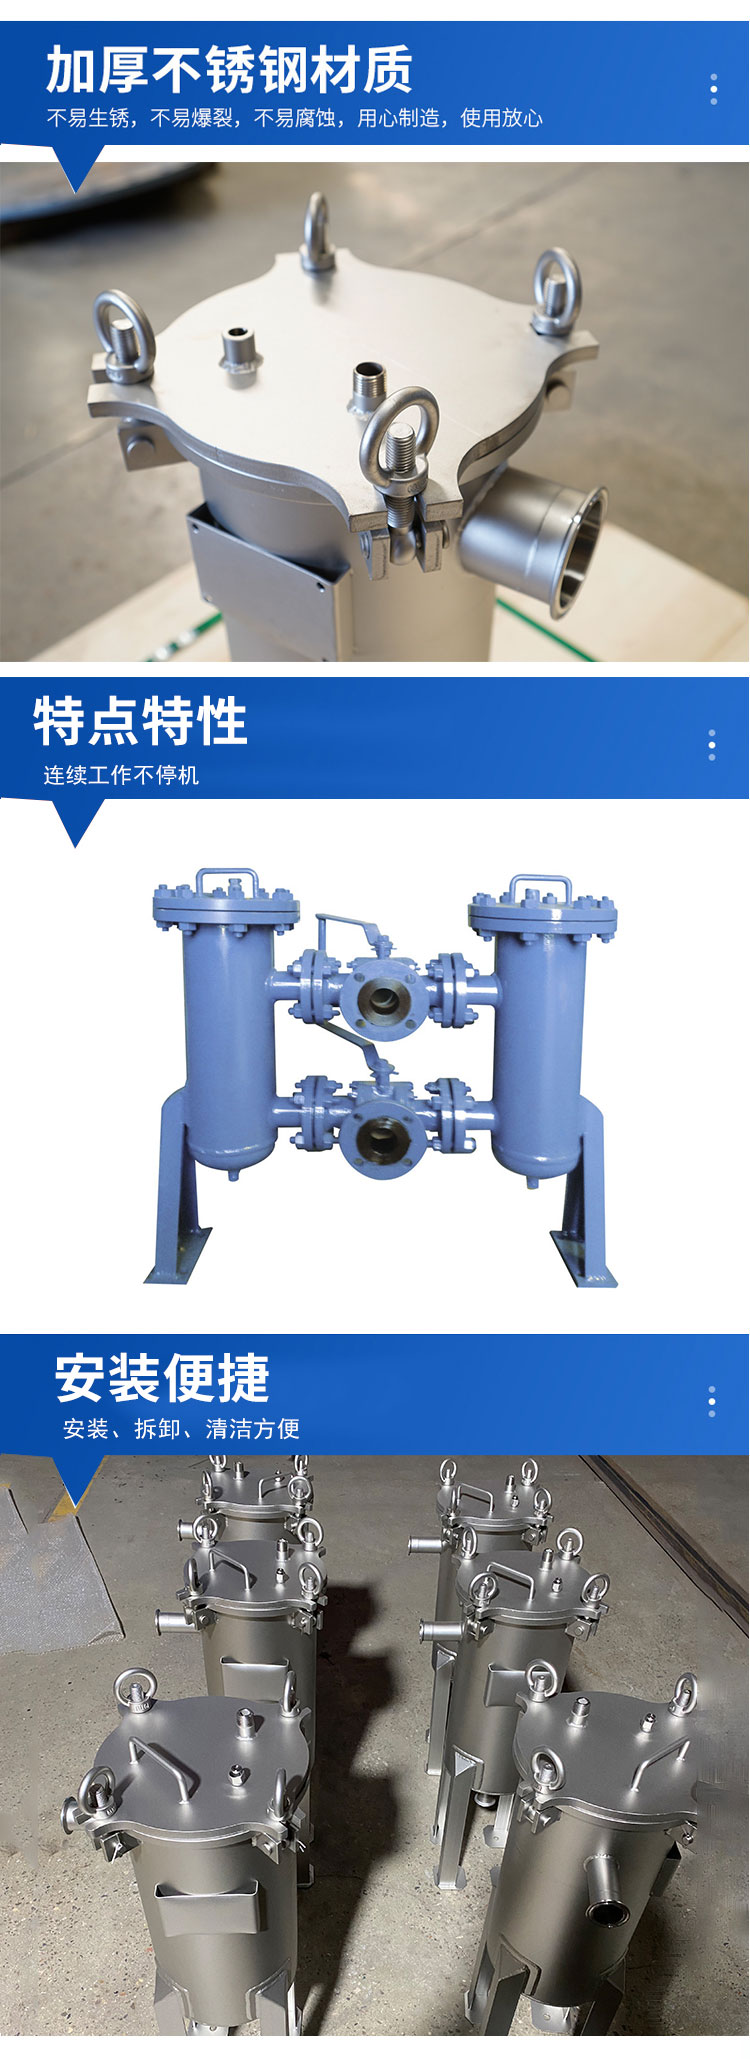 Solid liquid filtration separation Hanke stainless steel bag filter Pulp and paper industry water sales